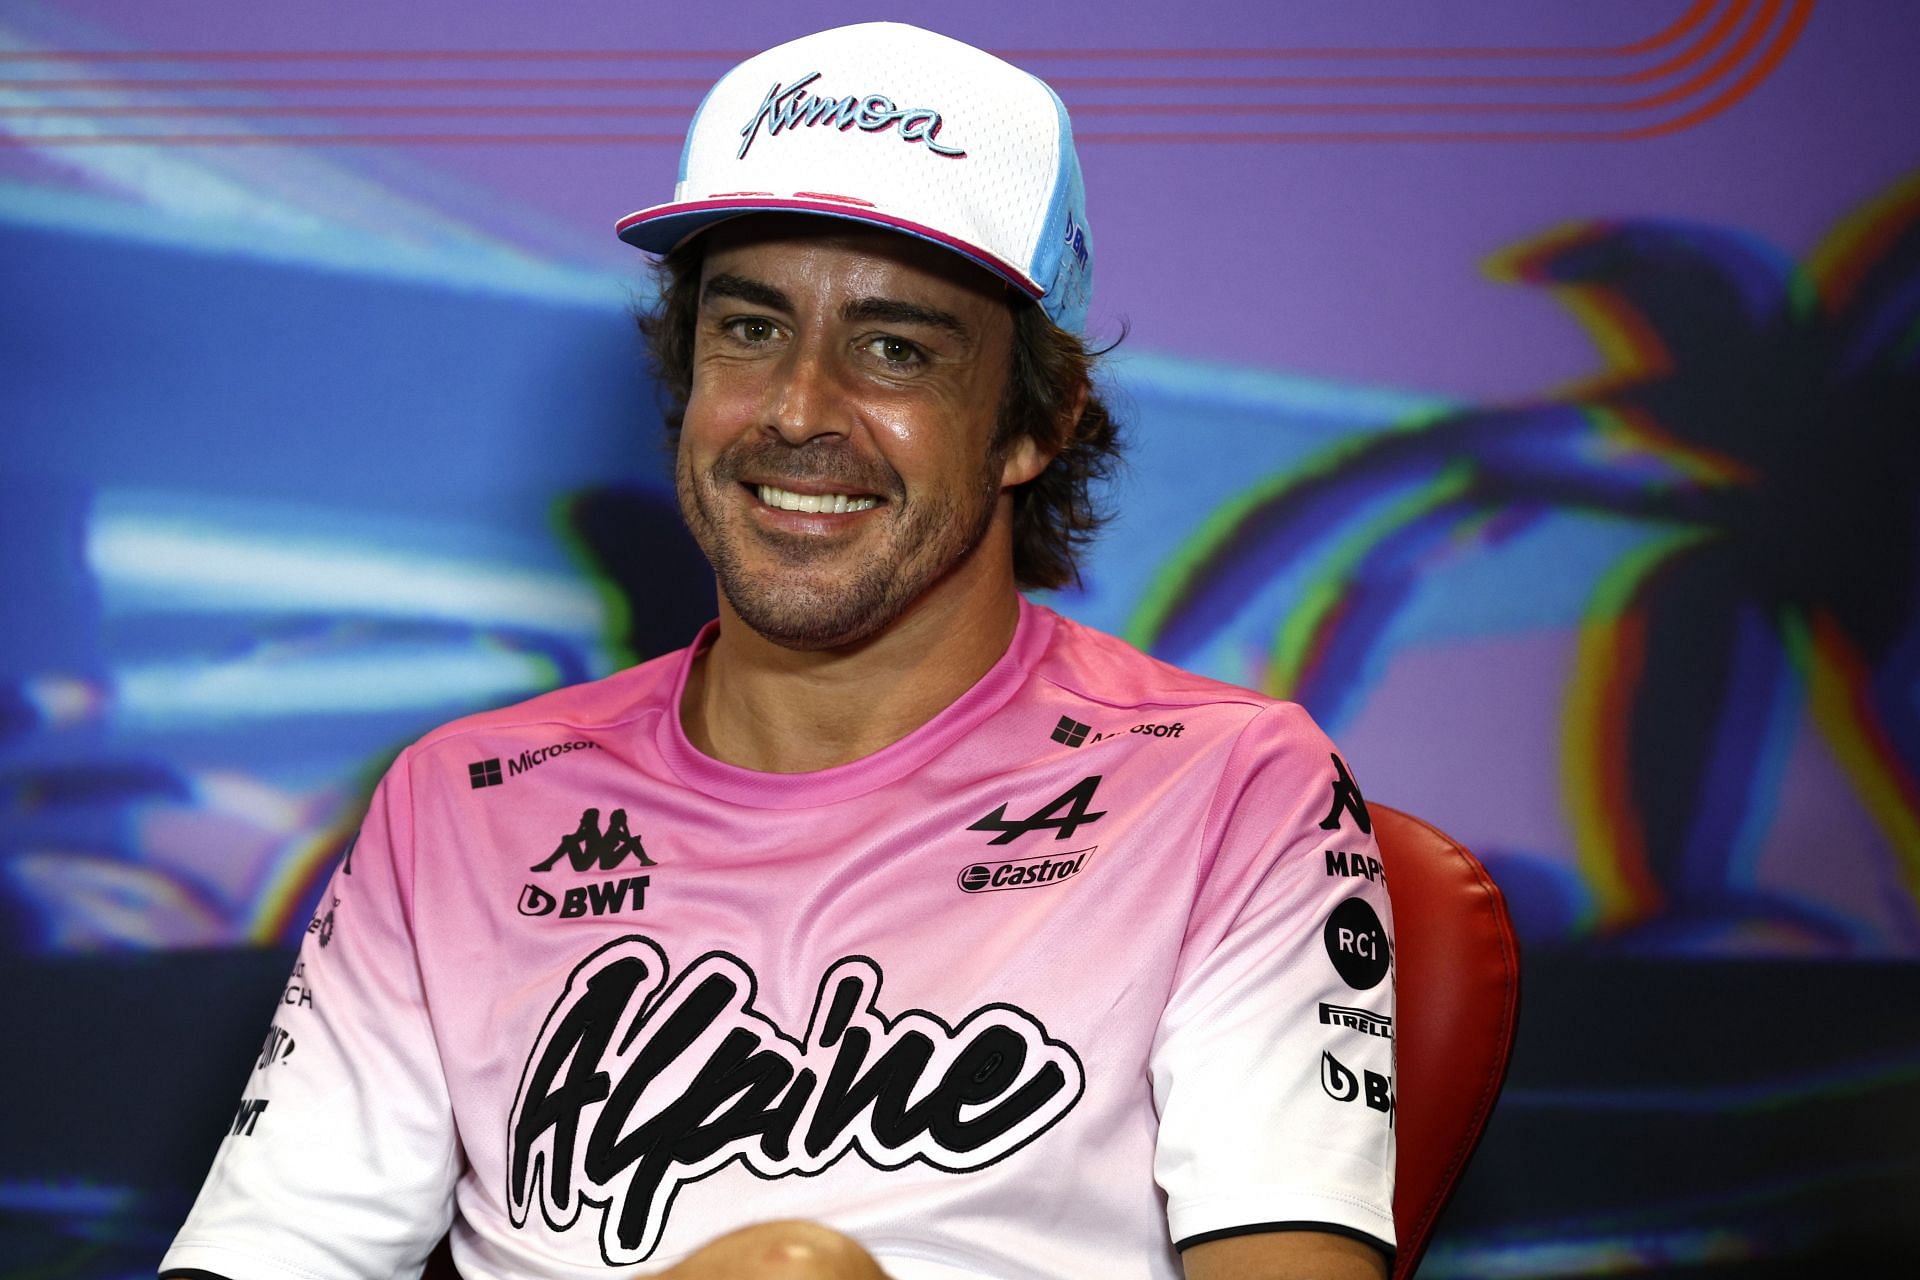 Fernando Alonso had a rather clumsy race in Miami